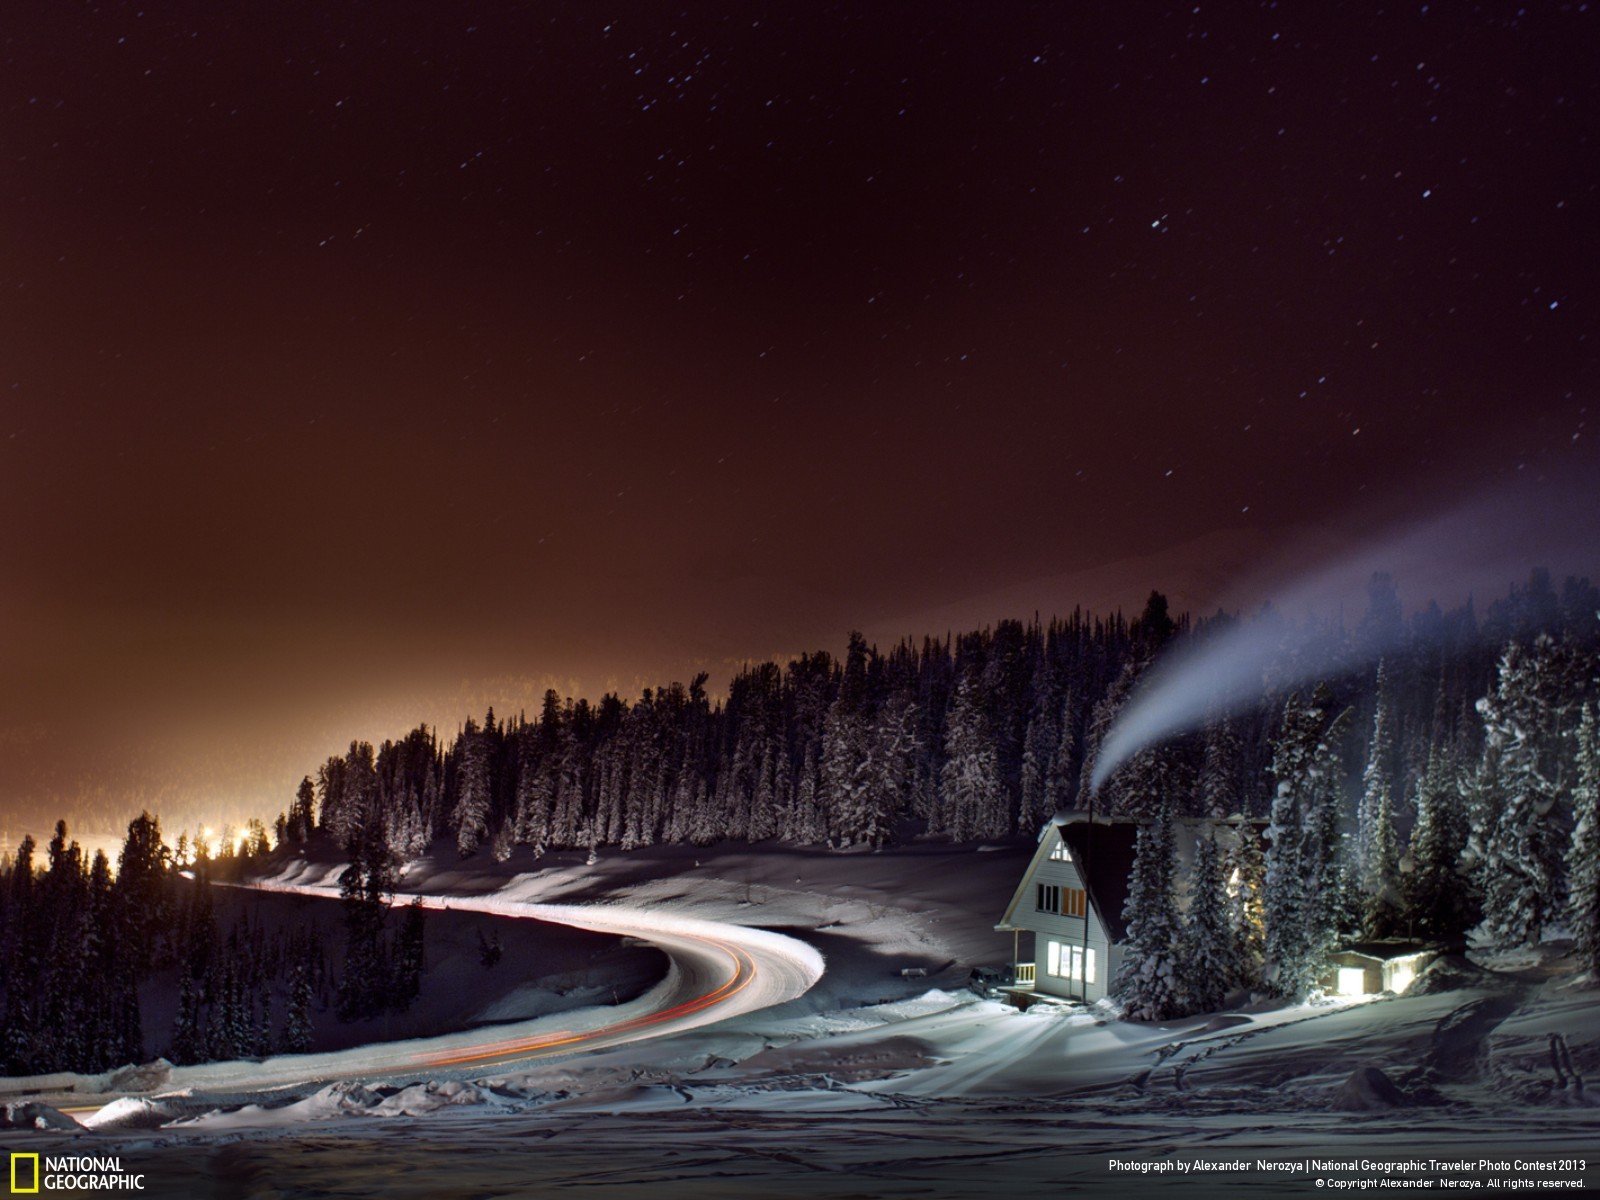 landscapes, Nature, Night, Forests, Russia, Houses, National, Geographic, Snow, Landscapes Wallpaper